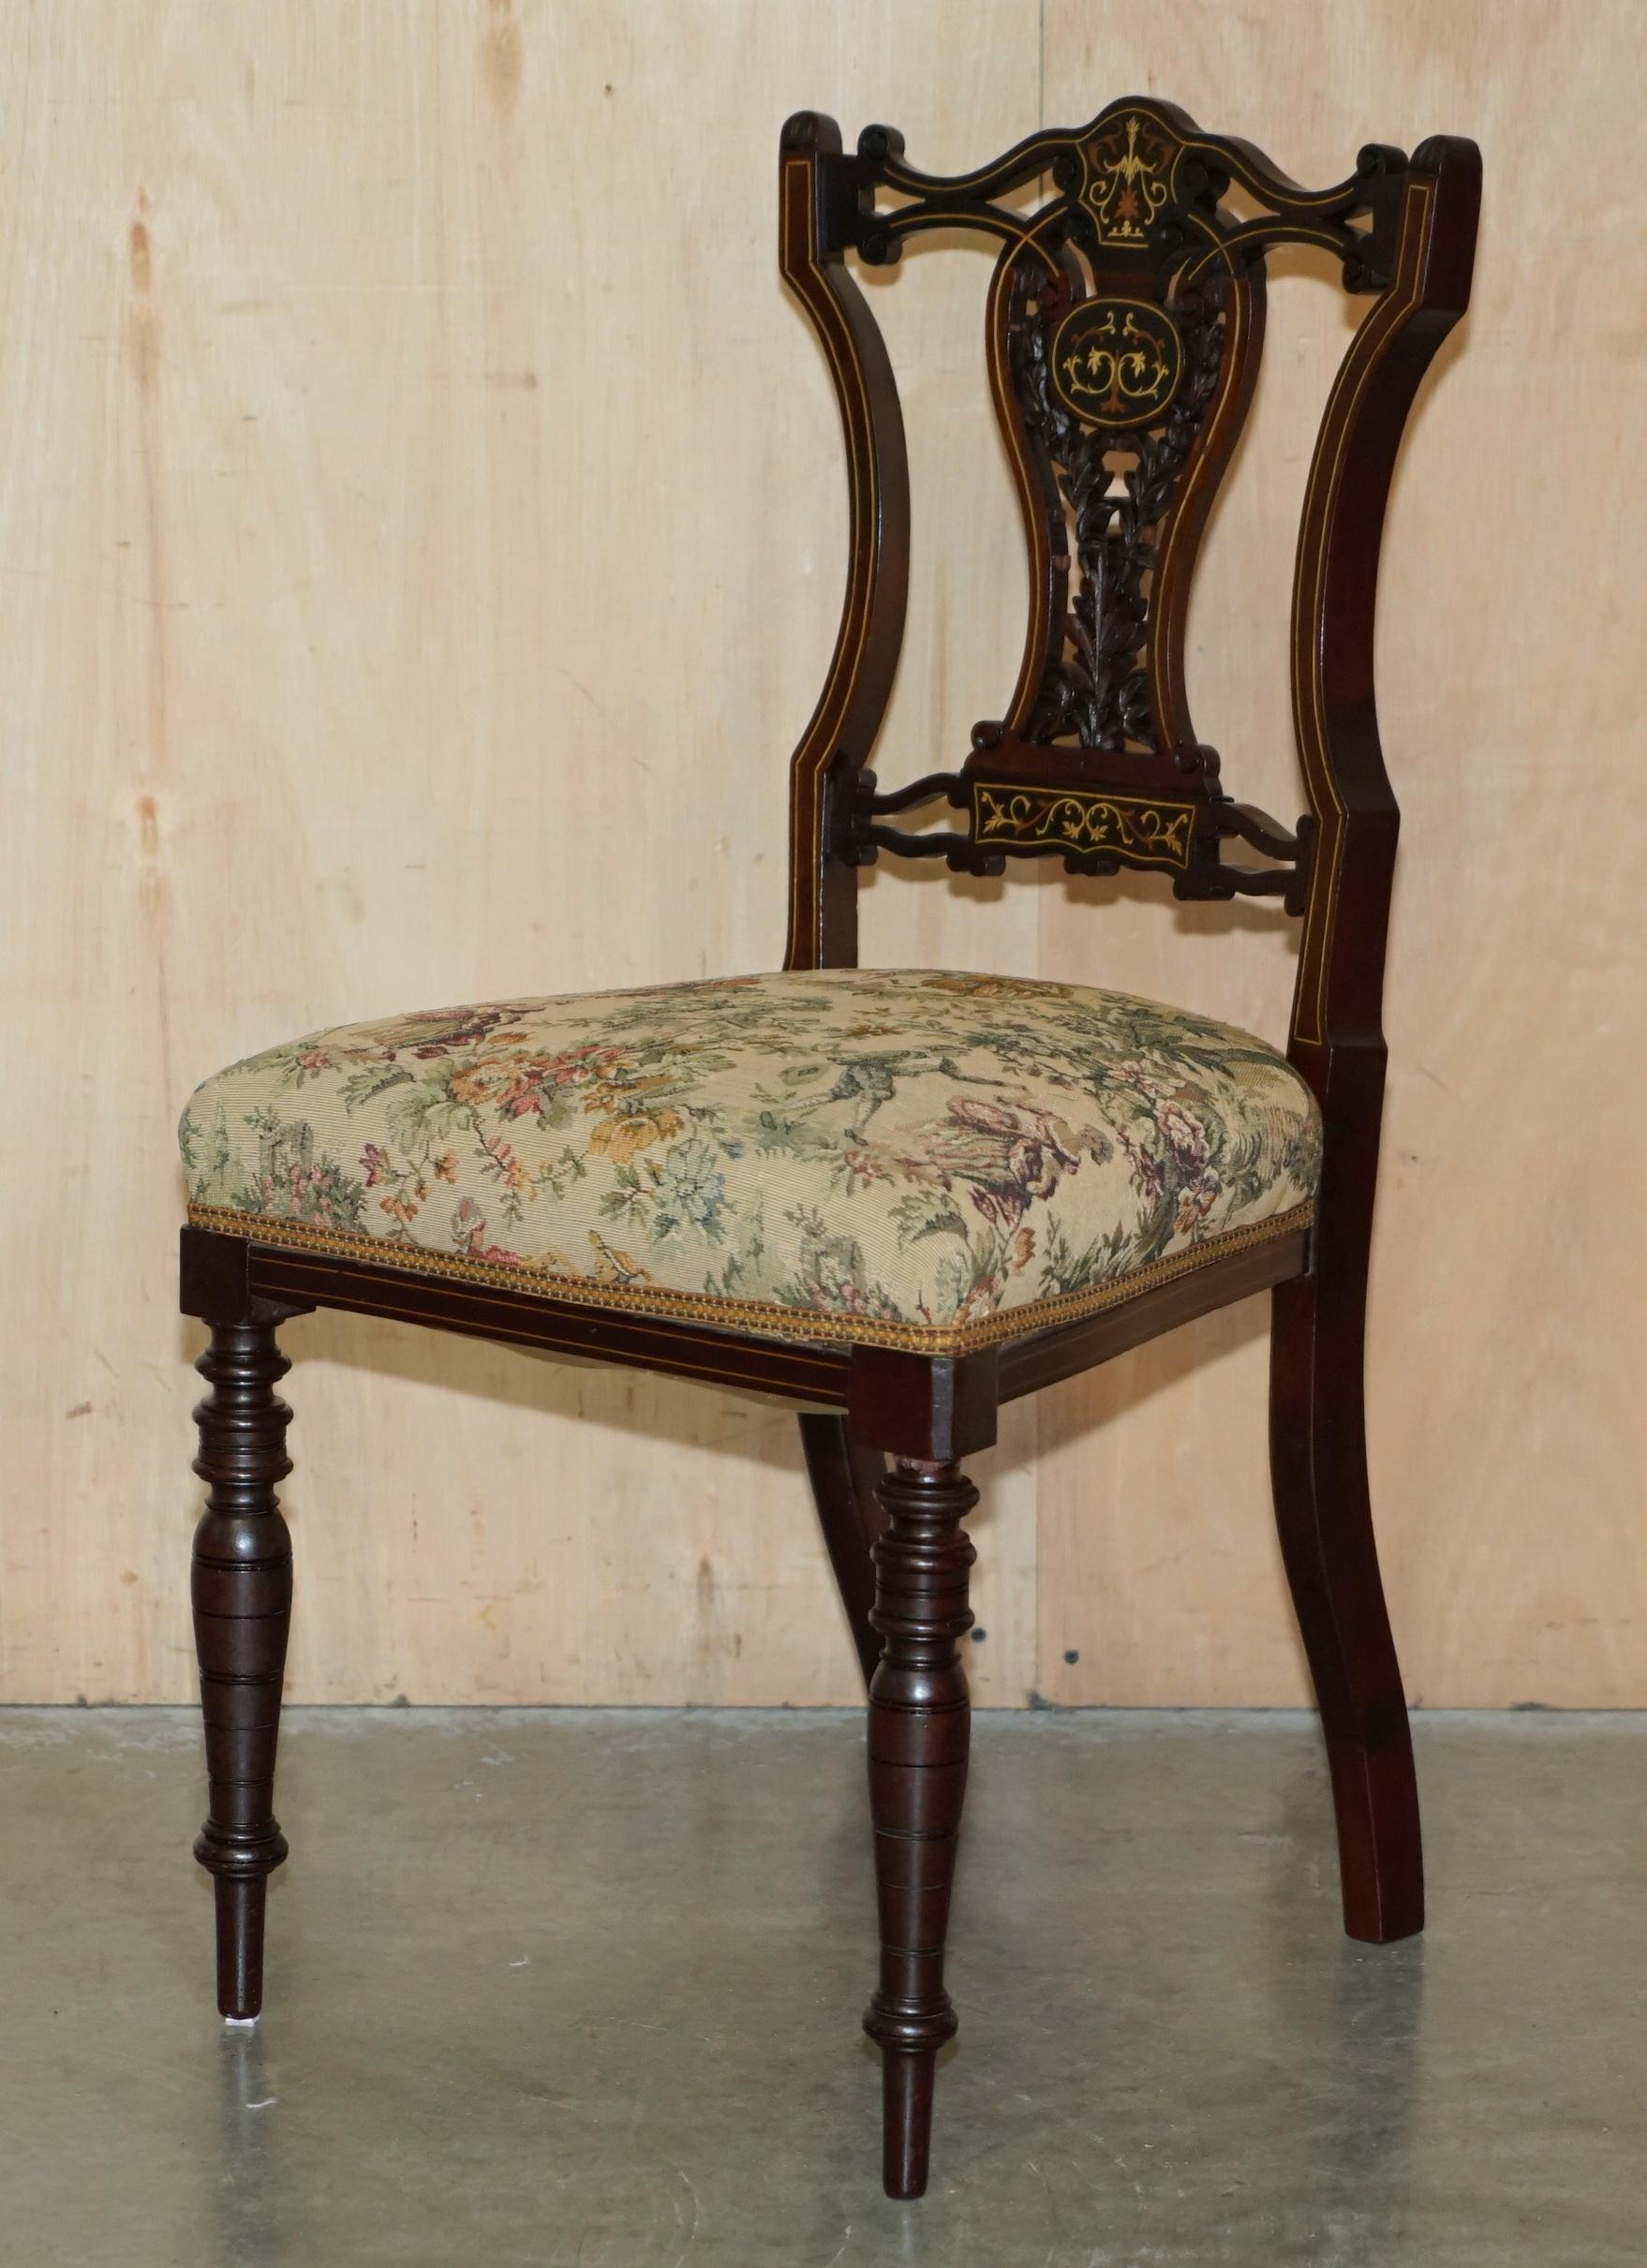 Royal House Antiques

Royal House Antiques is delighted to offer for sale this stunning pair of Antique Victorian Salon chairs with ornately hand carved Rosewood frames and Satinwood & Walnut inlay 

Please note the delivery fee listed is just a